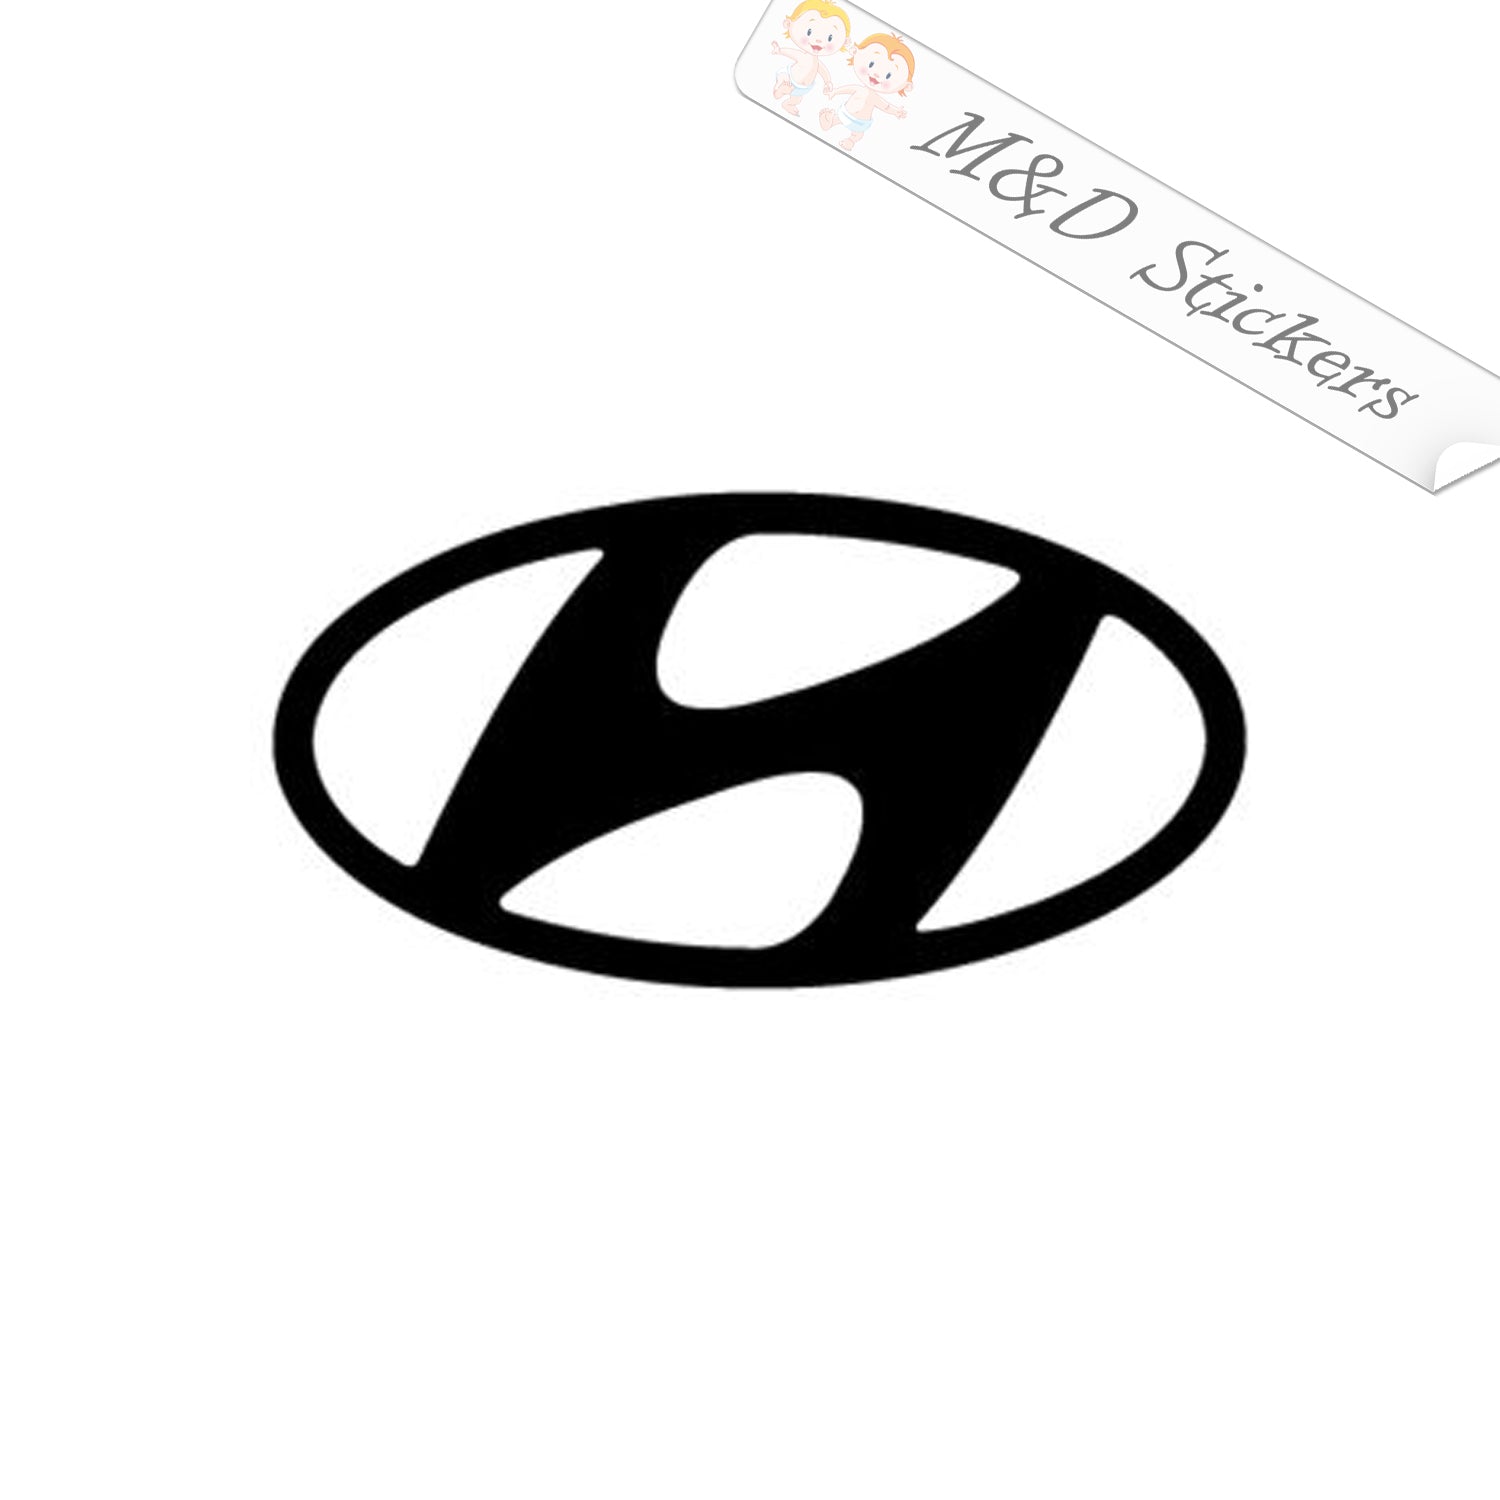 Hyundai Logo (4.5 - 30) Vinyl Decal in Different colors & size